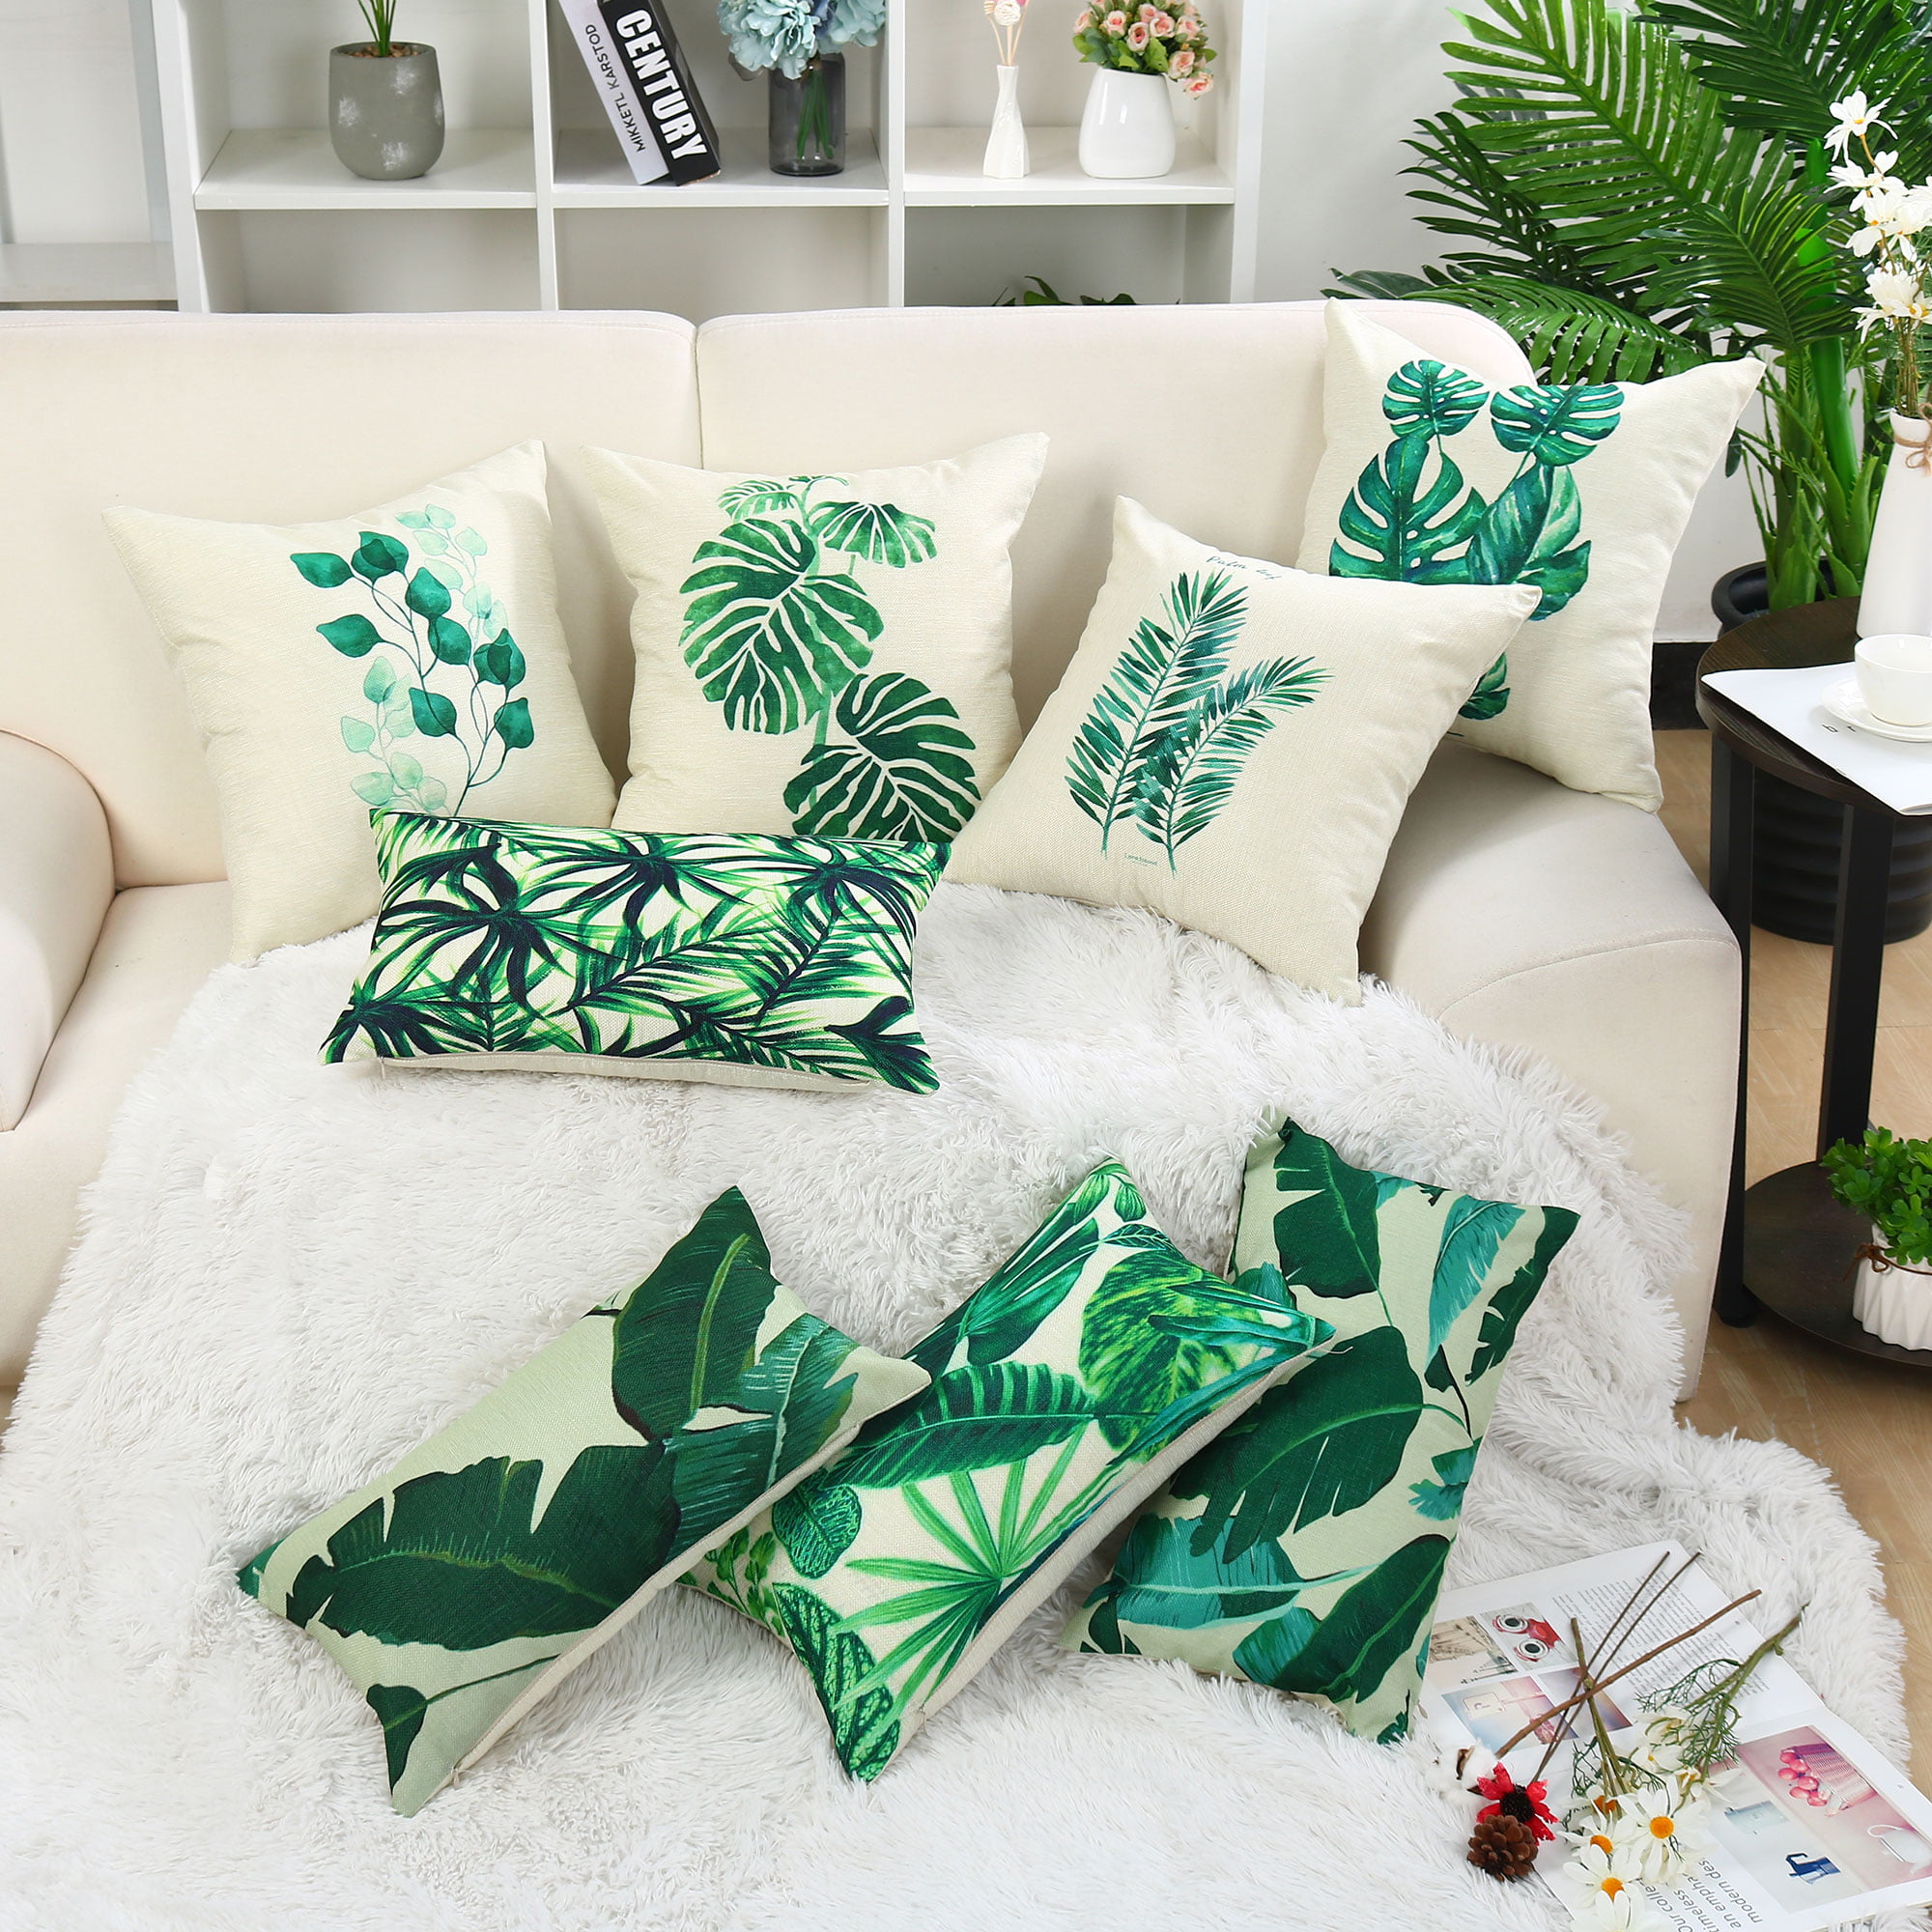 Cotton Linen Leaves Decorations Cushion Covers 18 x 18 Inch Sofa Home Decor New 